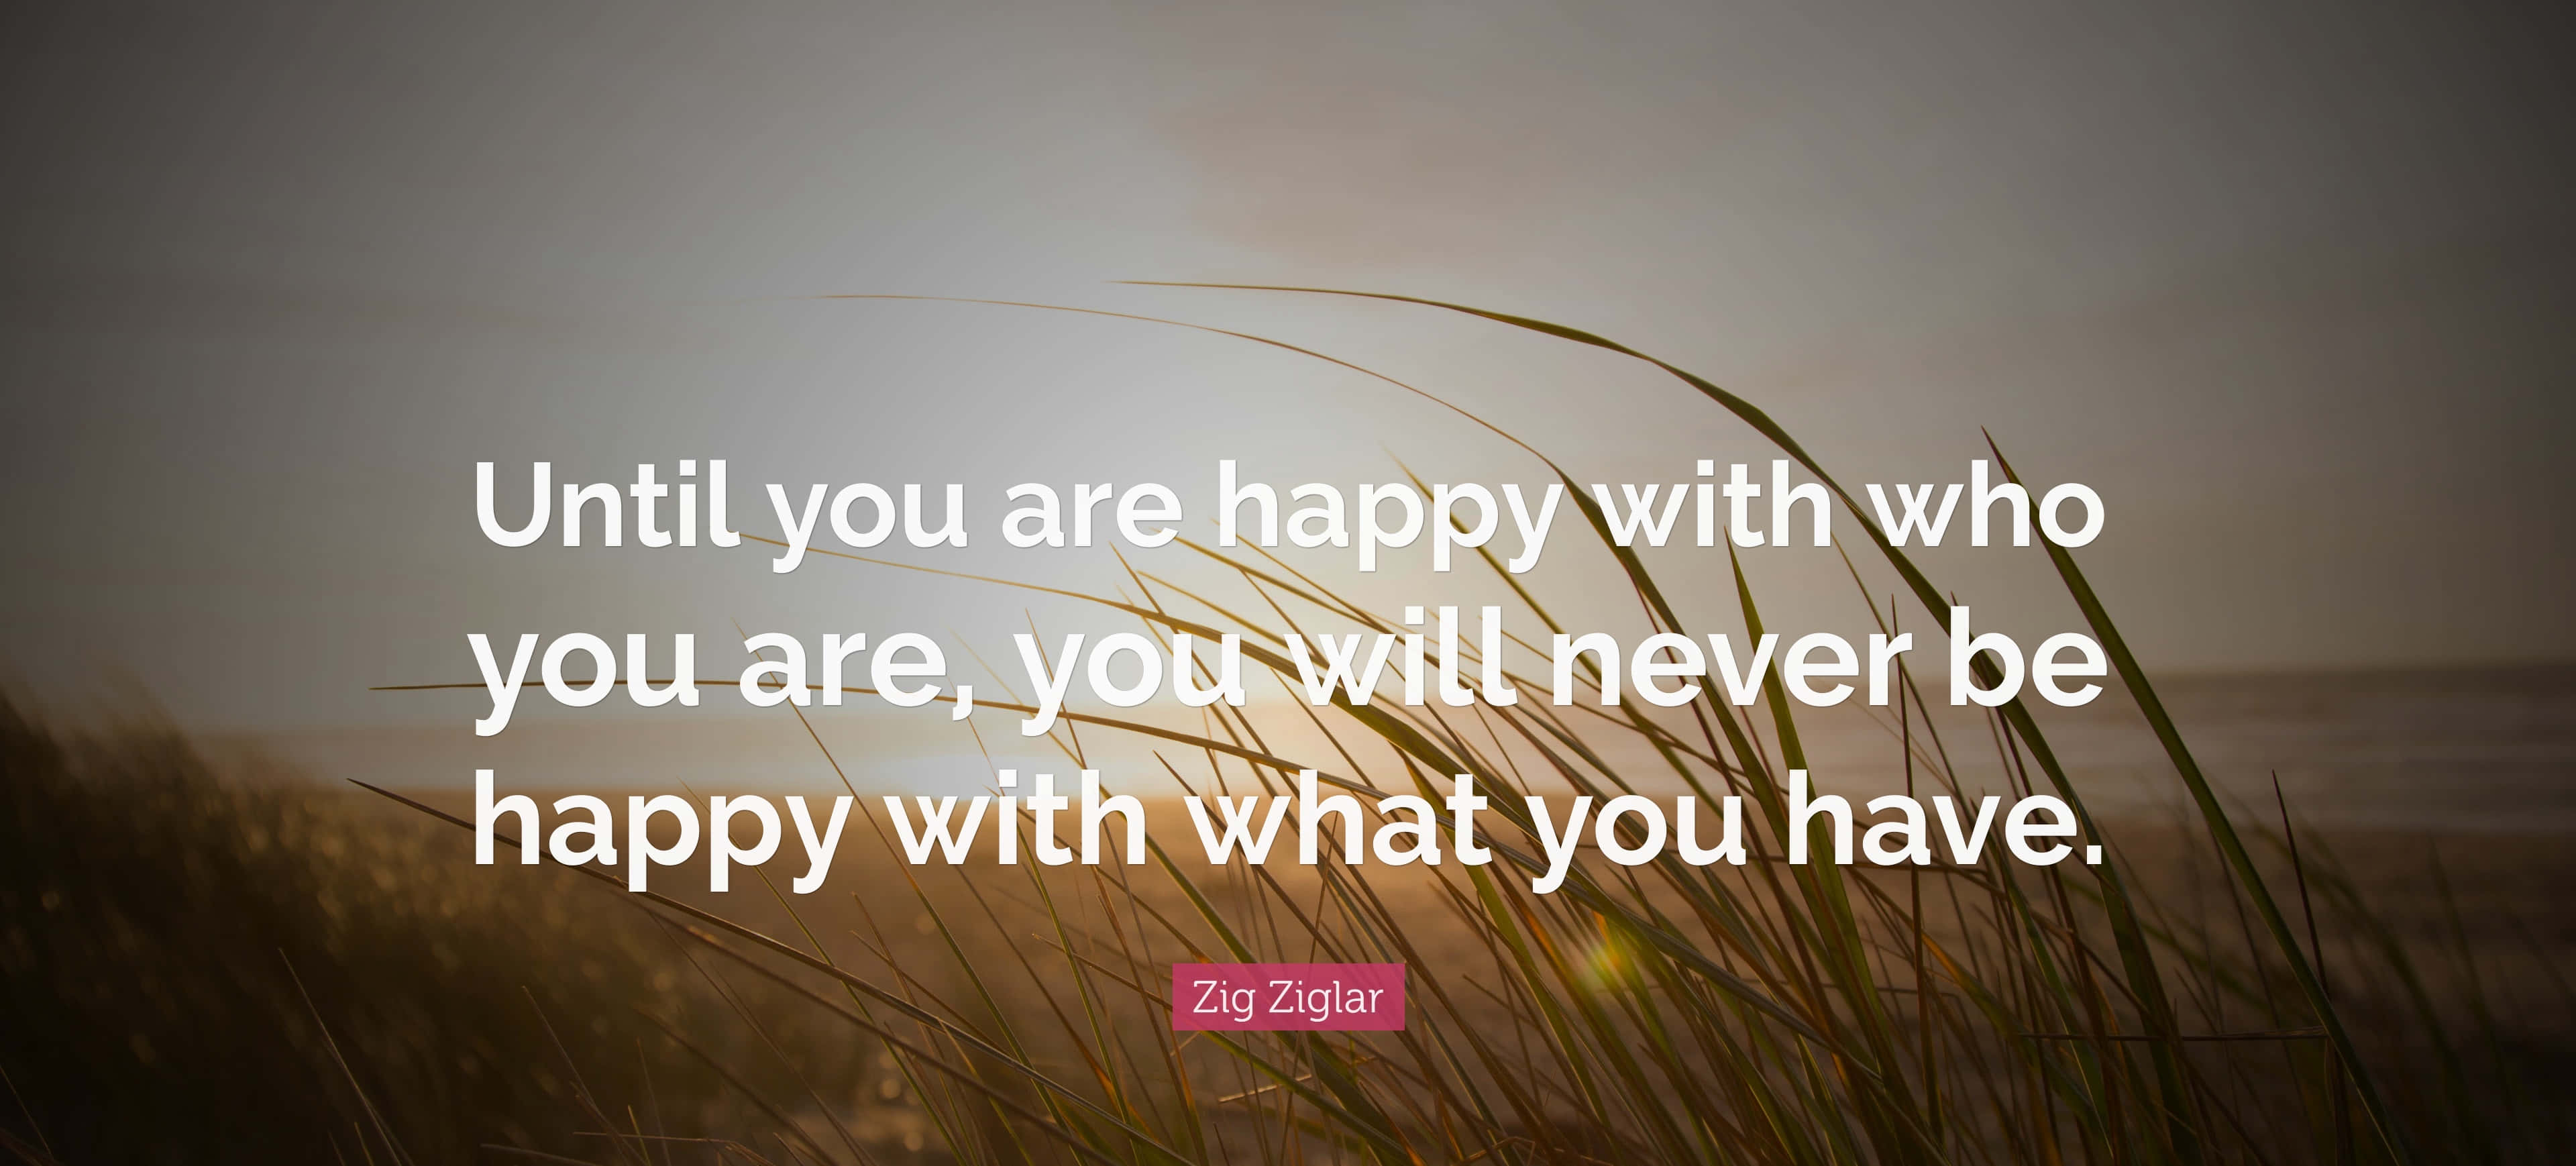 Inspiring Happiness Quote On Serene Beach Background Background